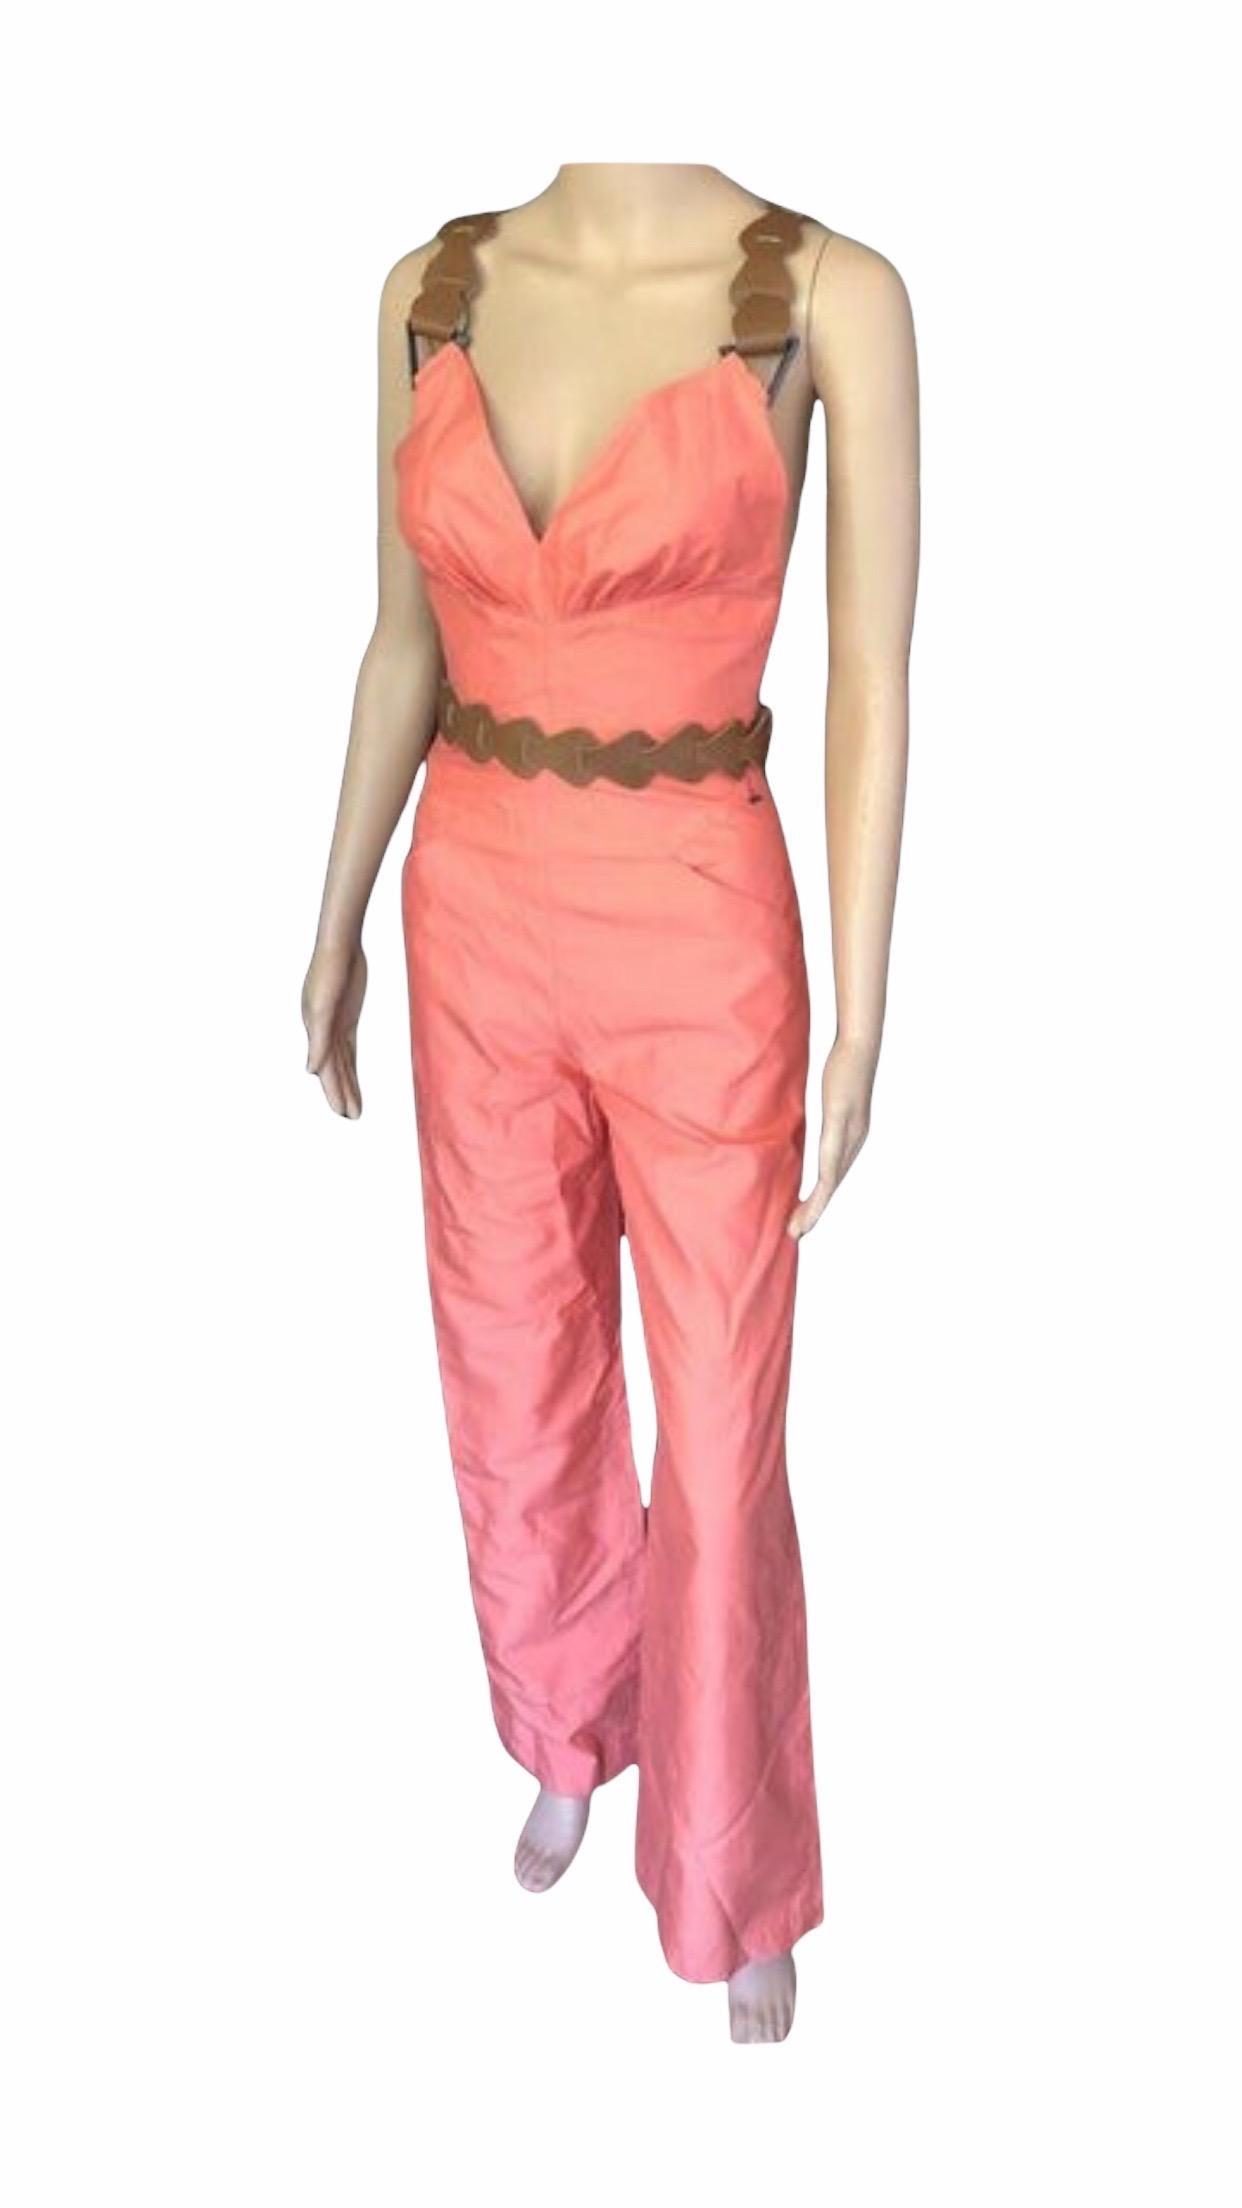 Women's Thierry Mugler S/S 2001 Couture Runway Open Back Jumpsuit For Sale